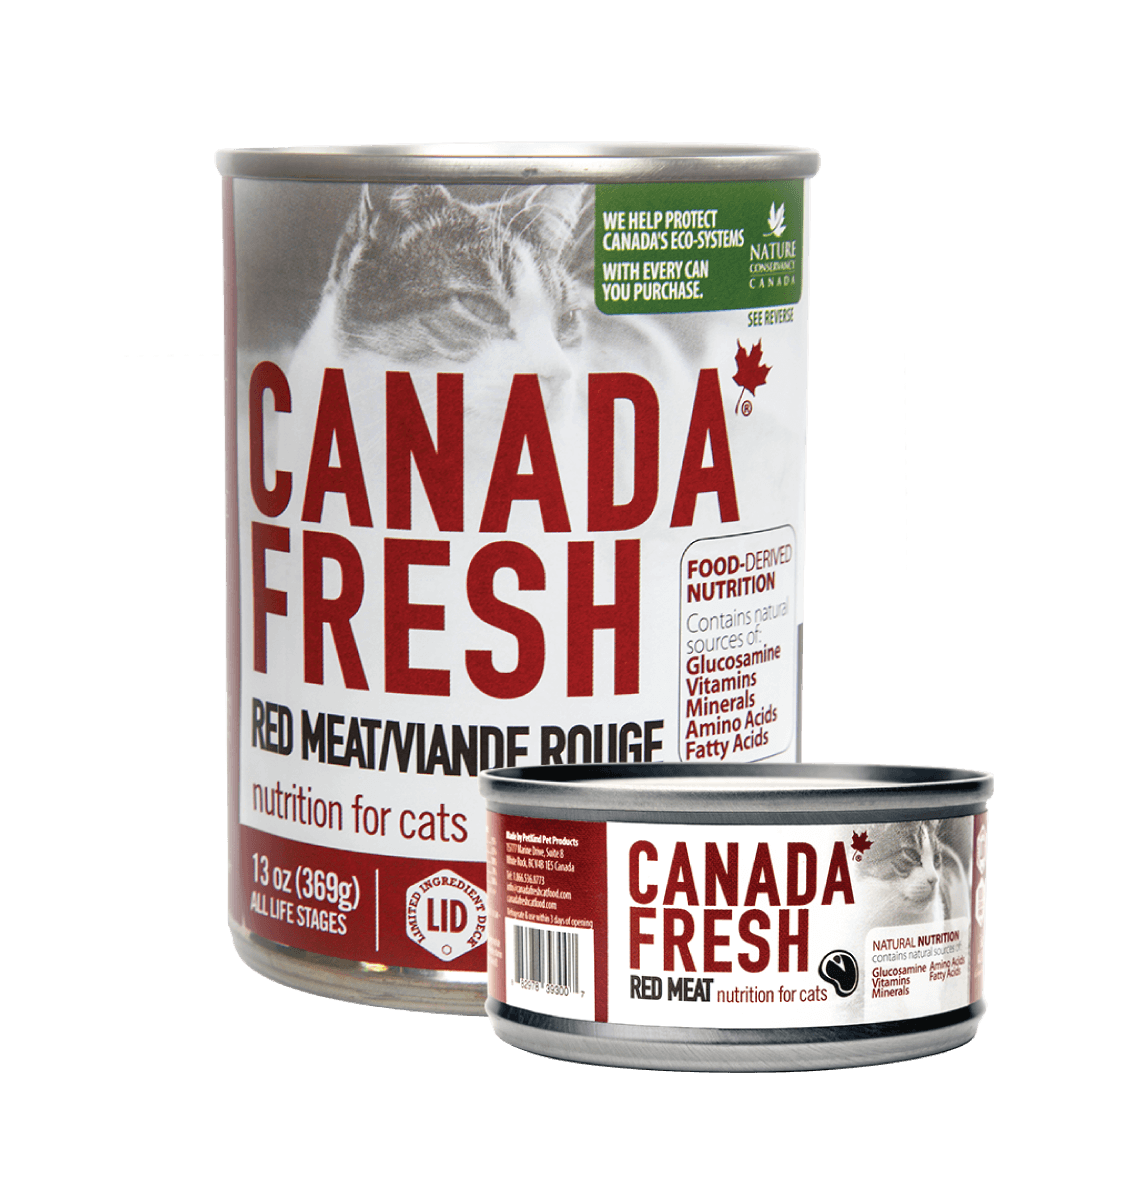 Canada Fresh Red Meat for cat (13 oz and 5.5 oz)